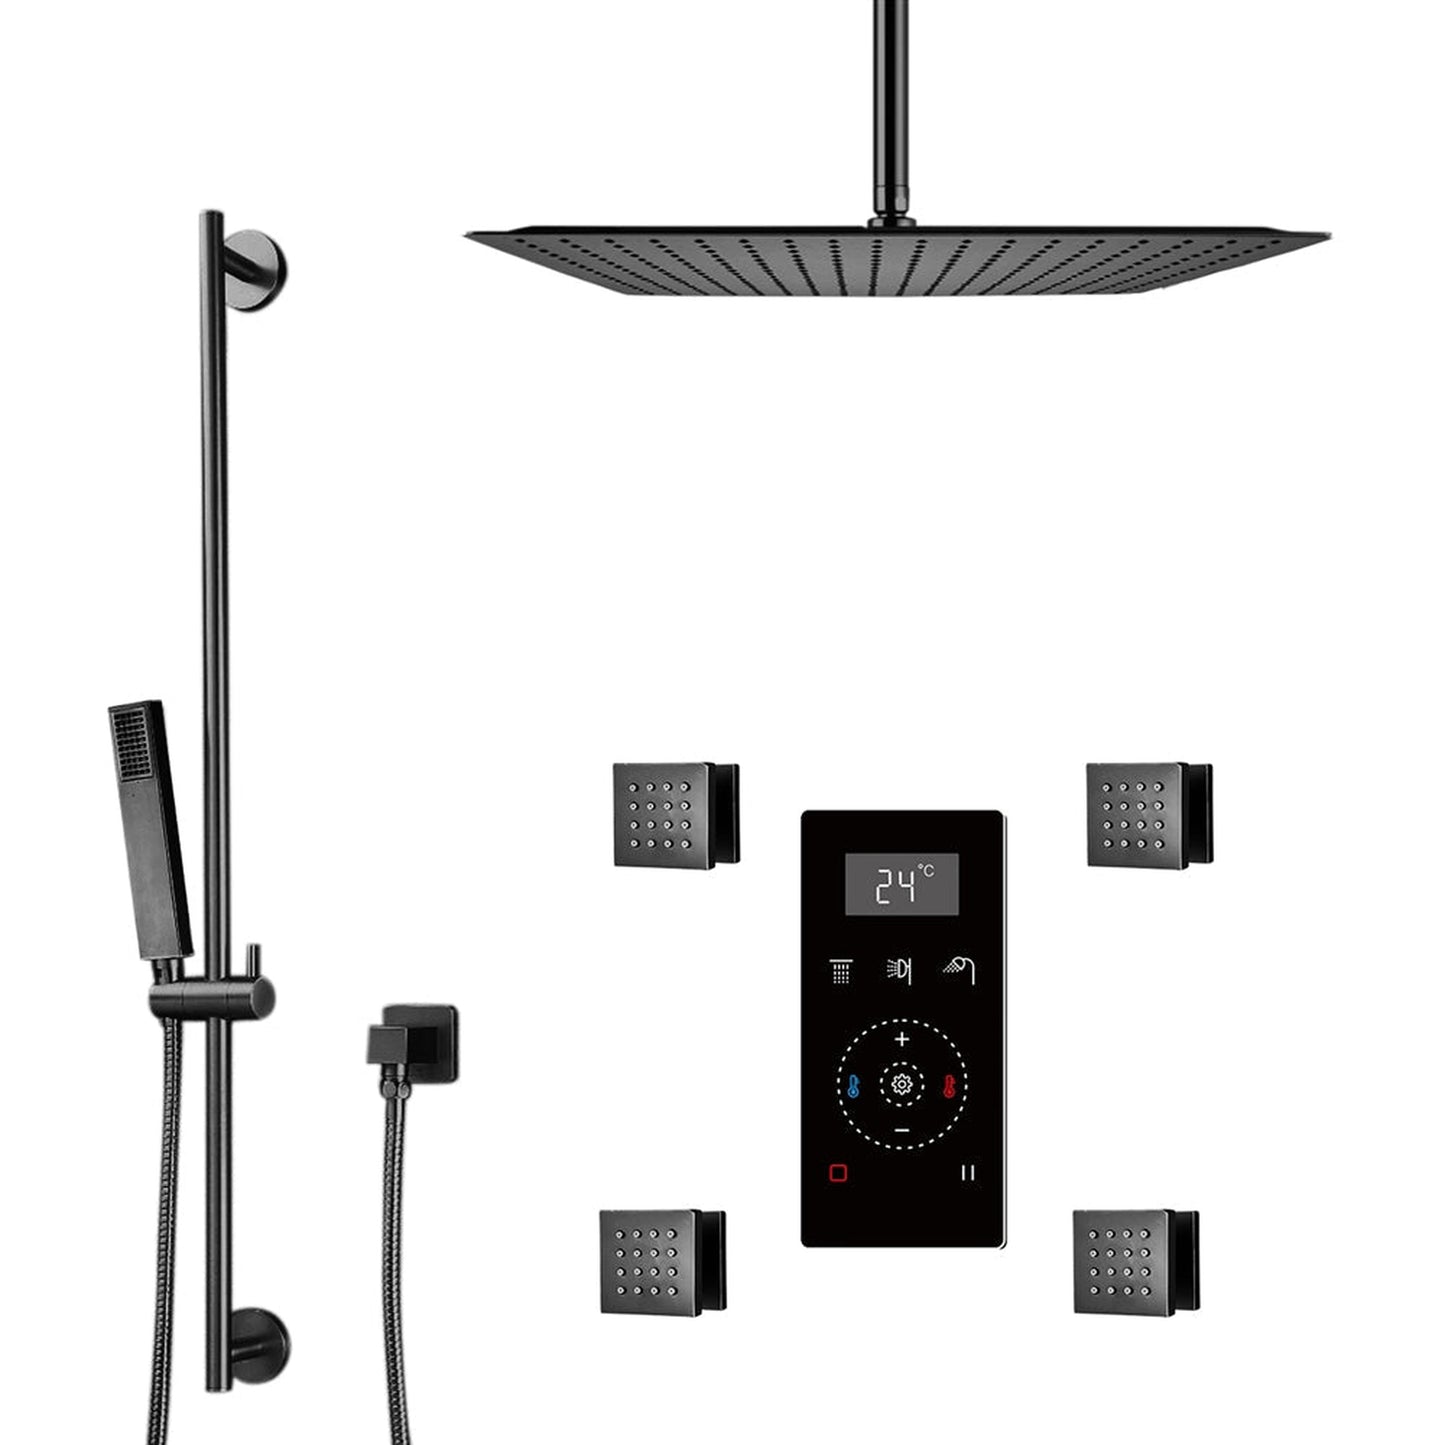 Fontana 16" Matte Black Ceiling Mounted Thermostatic Massage Shower Digital Touch Screen Shower Mixer Display 3-Function Rainfall Shower System With Hand Shower and 4-Jet Body Sprays